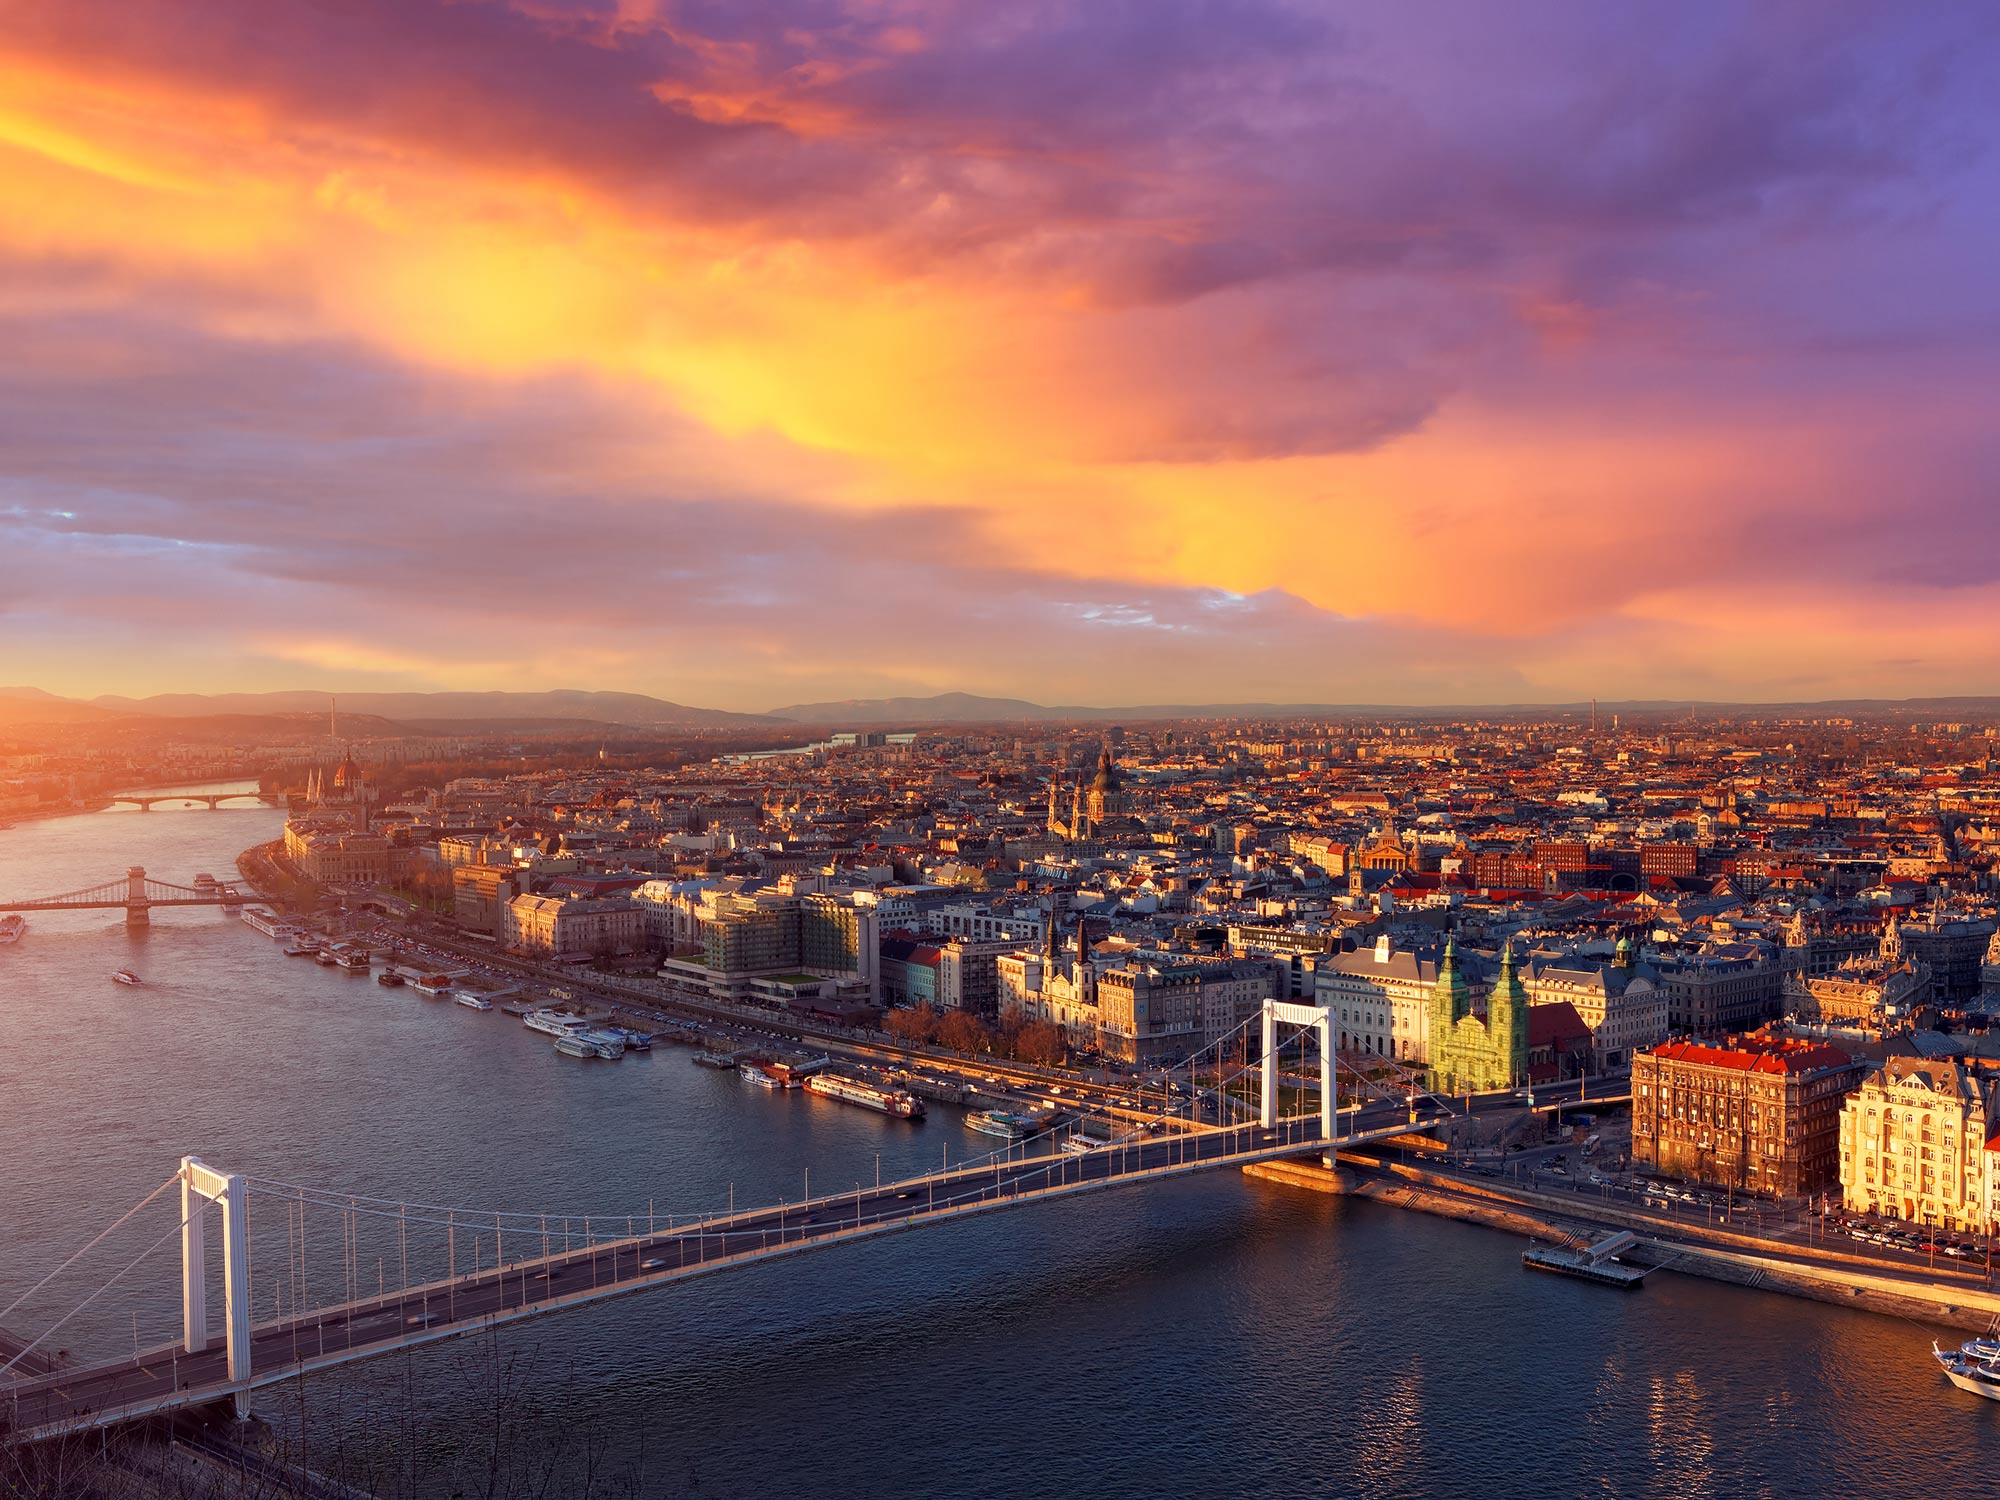 Budapest cityscape at sunset. The Elizabeth bridge is visible in the foreground.